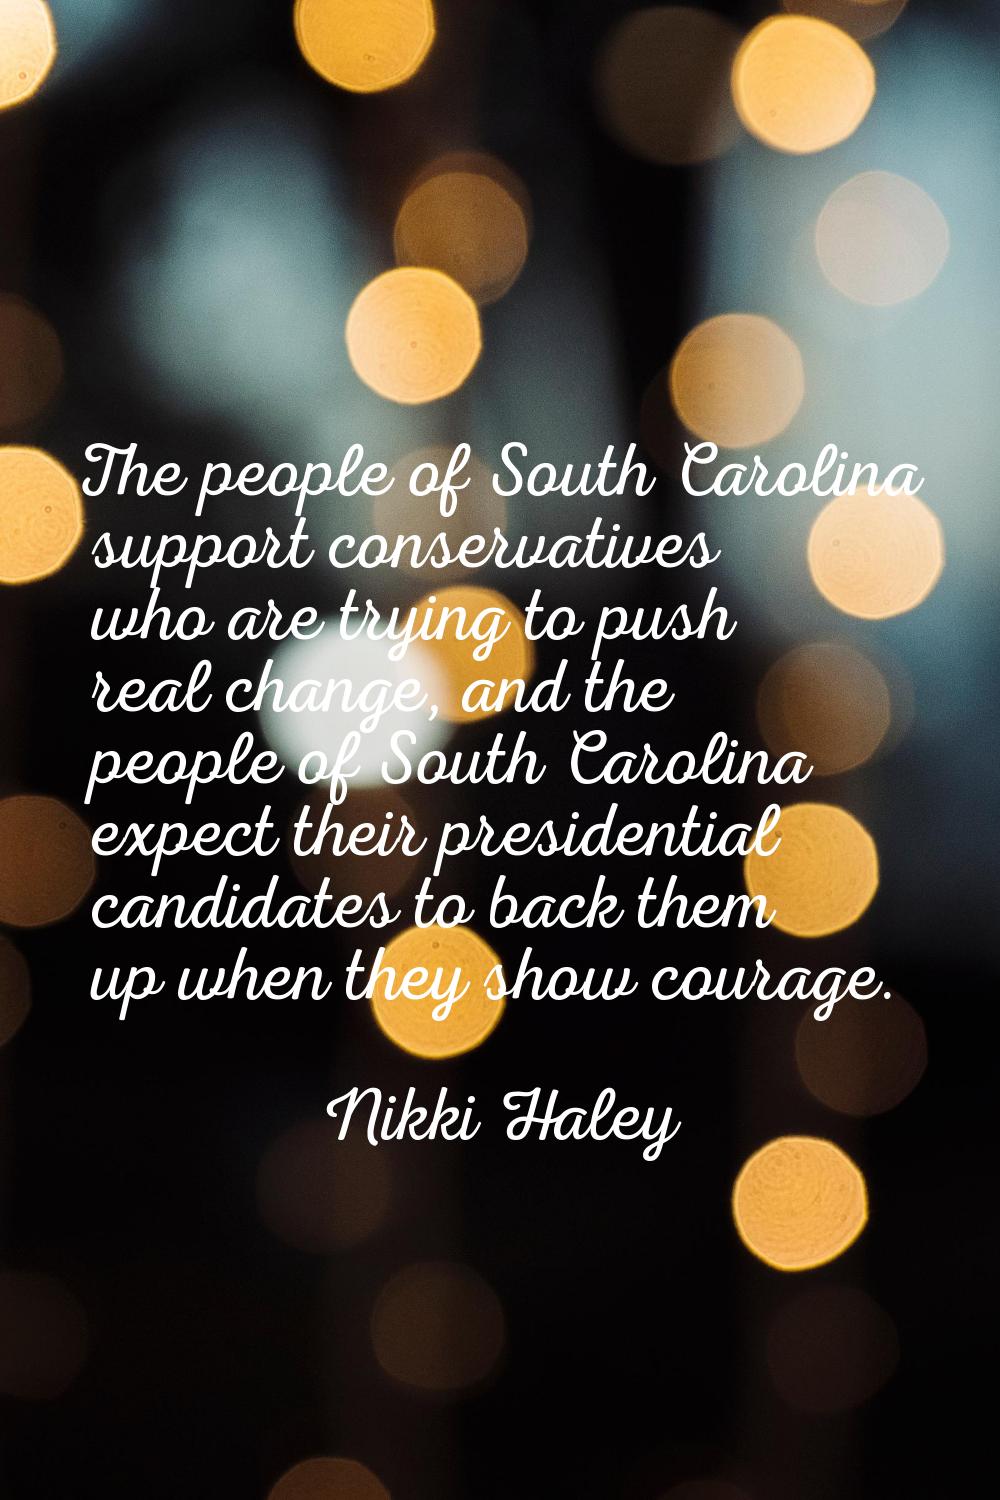 The people of South Carolina support conservatives who are trying to push real change, and the peop